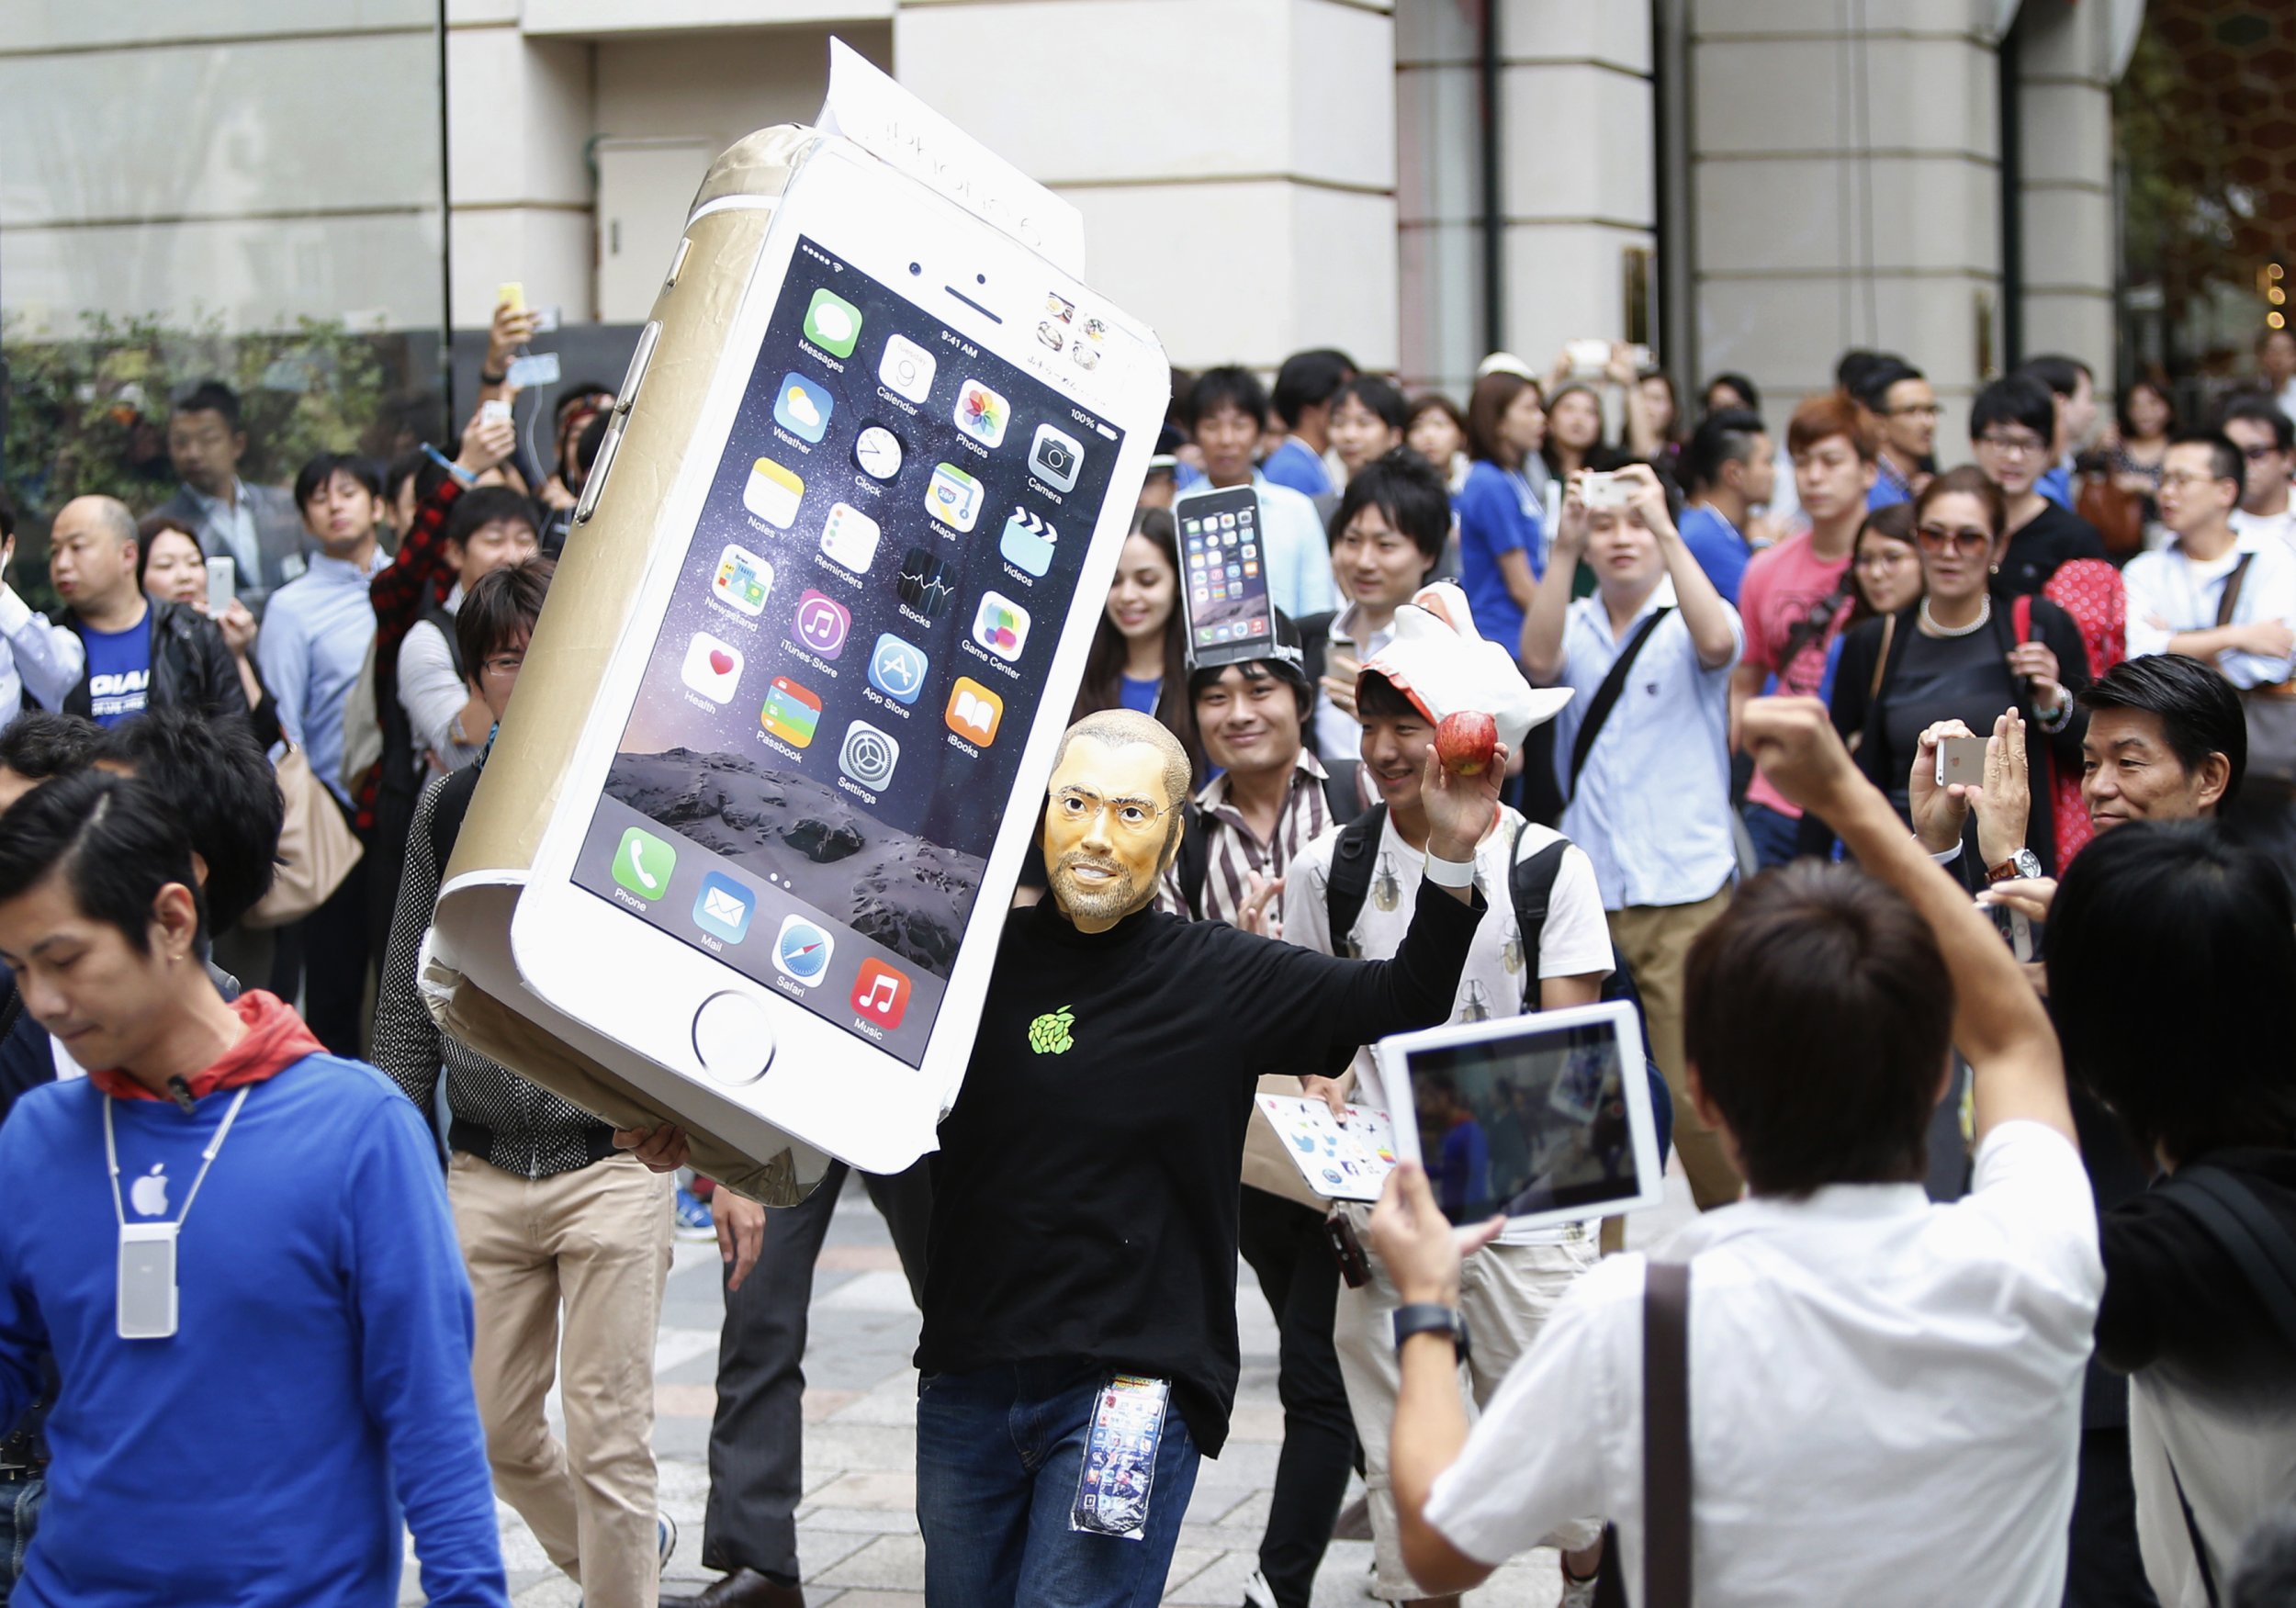 Where To Buy Iphone 6 Without Waiting In Line On Launch Day